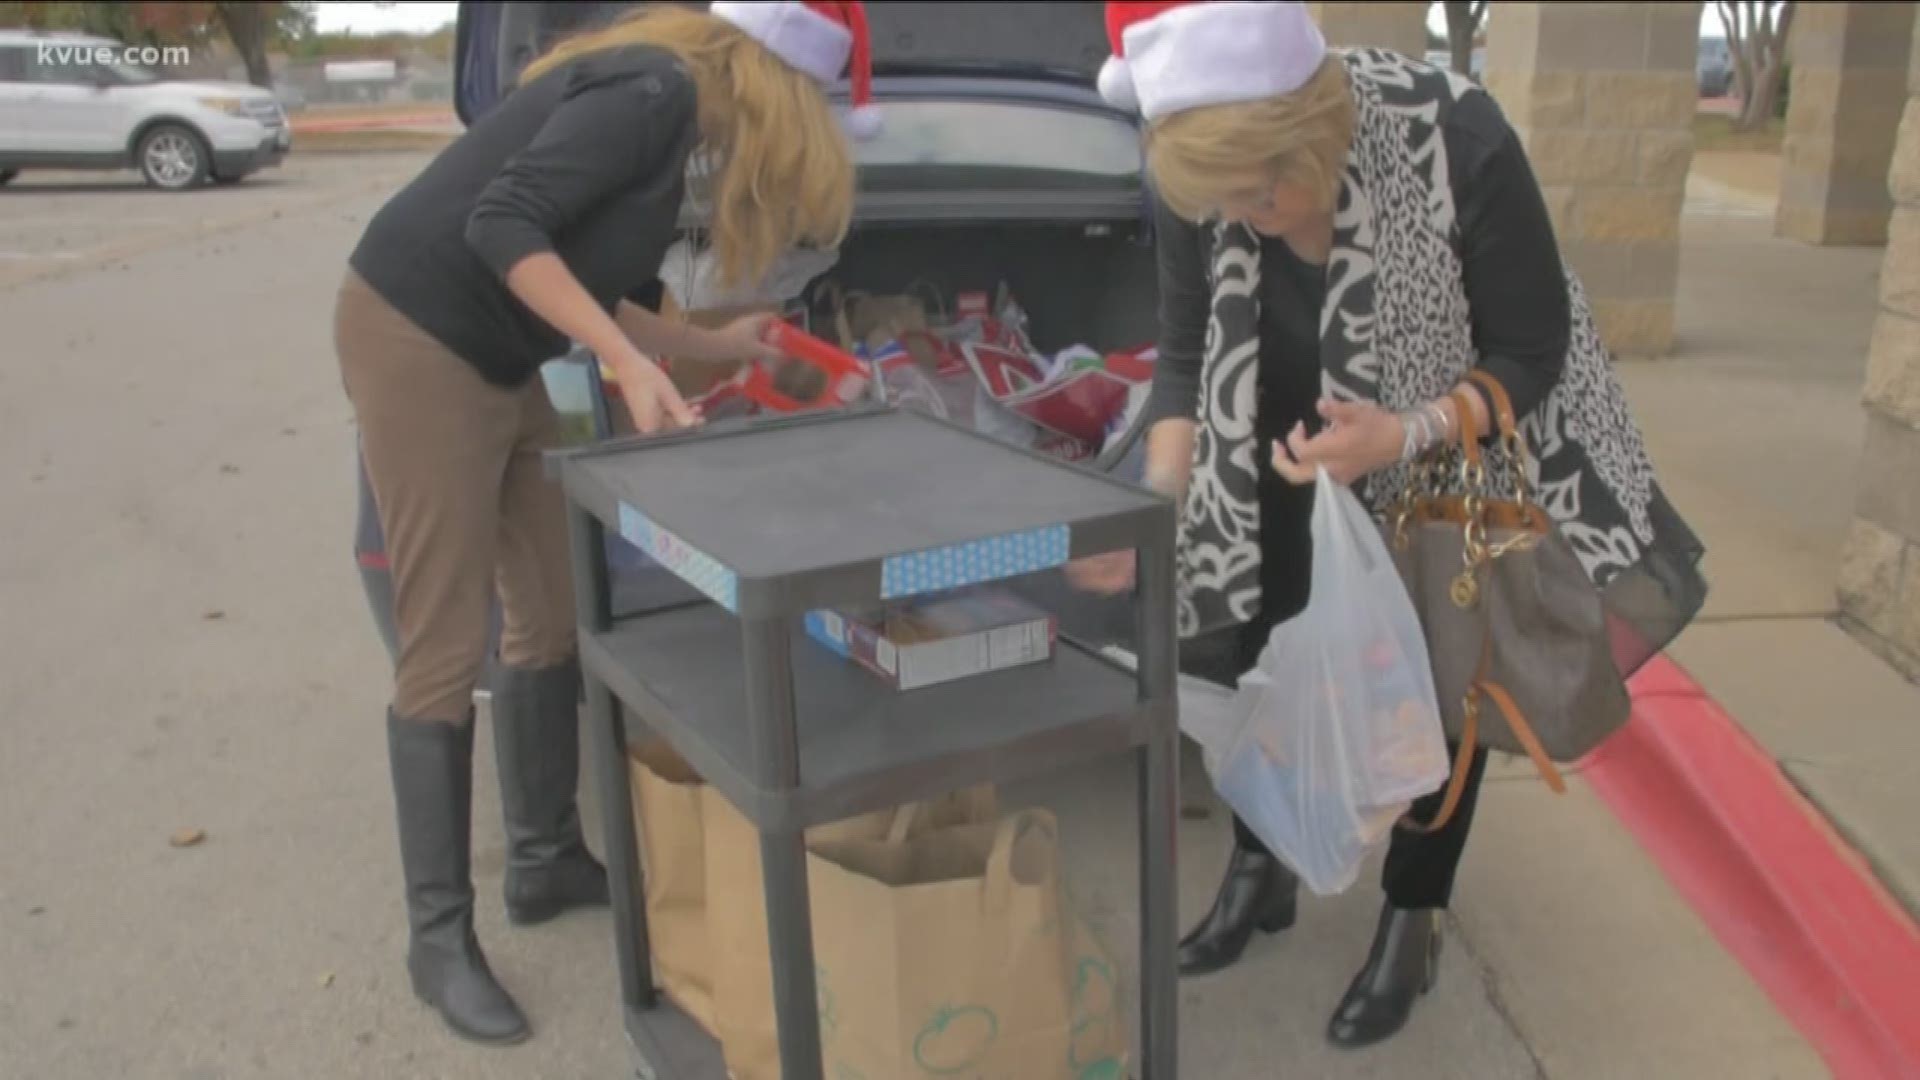 An Austin-area woman is taking her company's holiday give-back challenge to a whole new level.